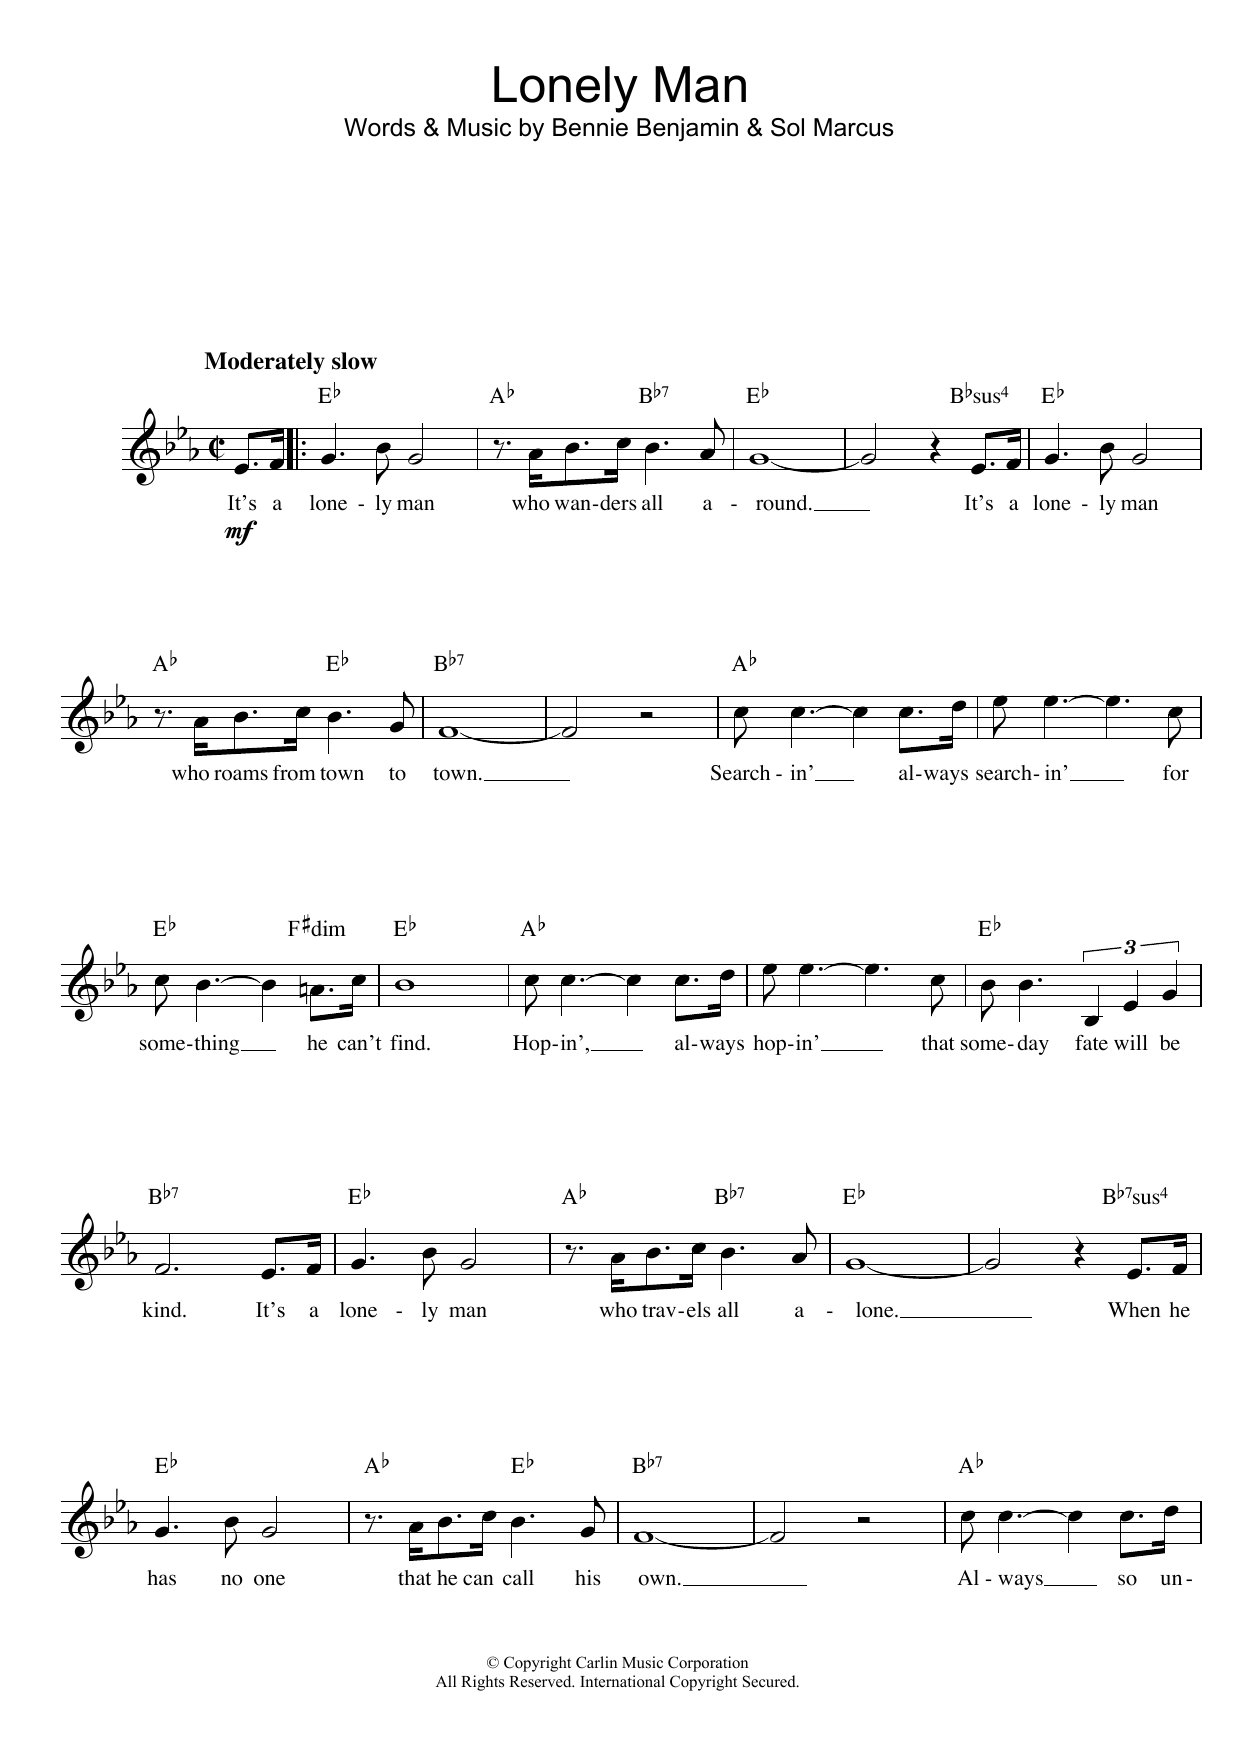 Download Bennie Benjamin and Sol Marcus Lonely Man Sheet Music